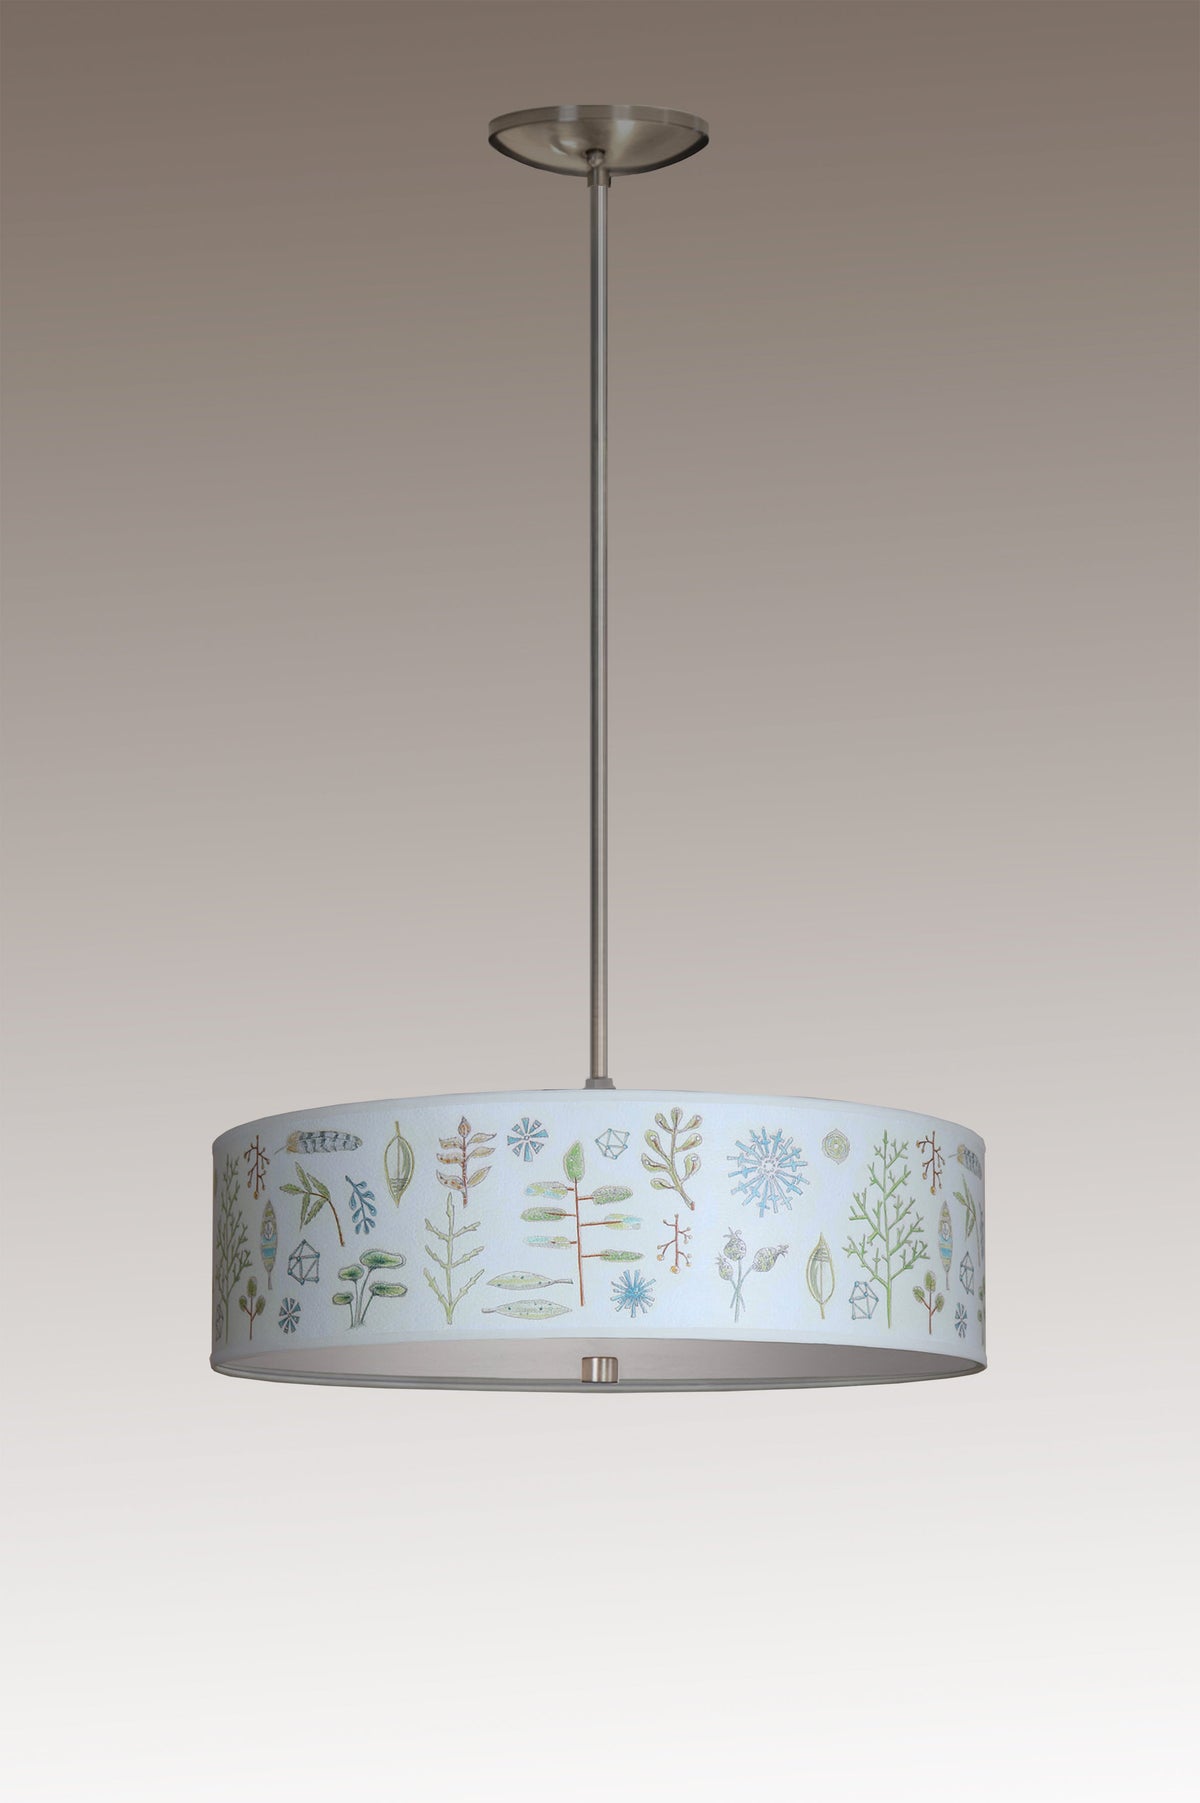 Janna Ugone &amp; Co Ceiling Fixture Skinny Drum Pendant in Field Chart